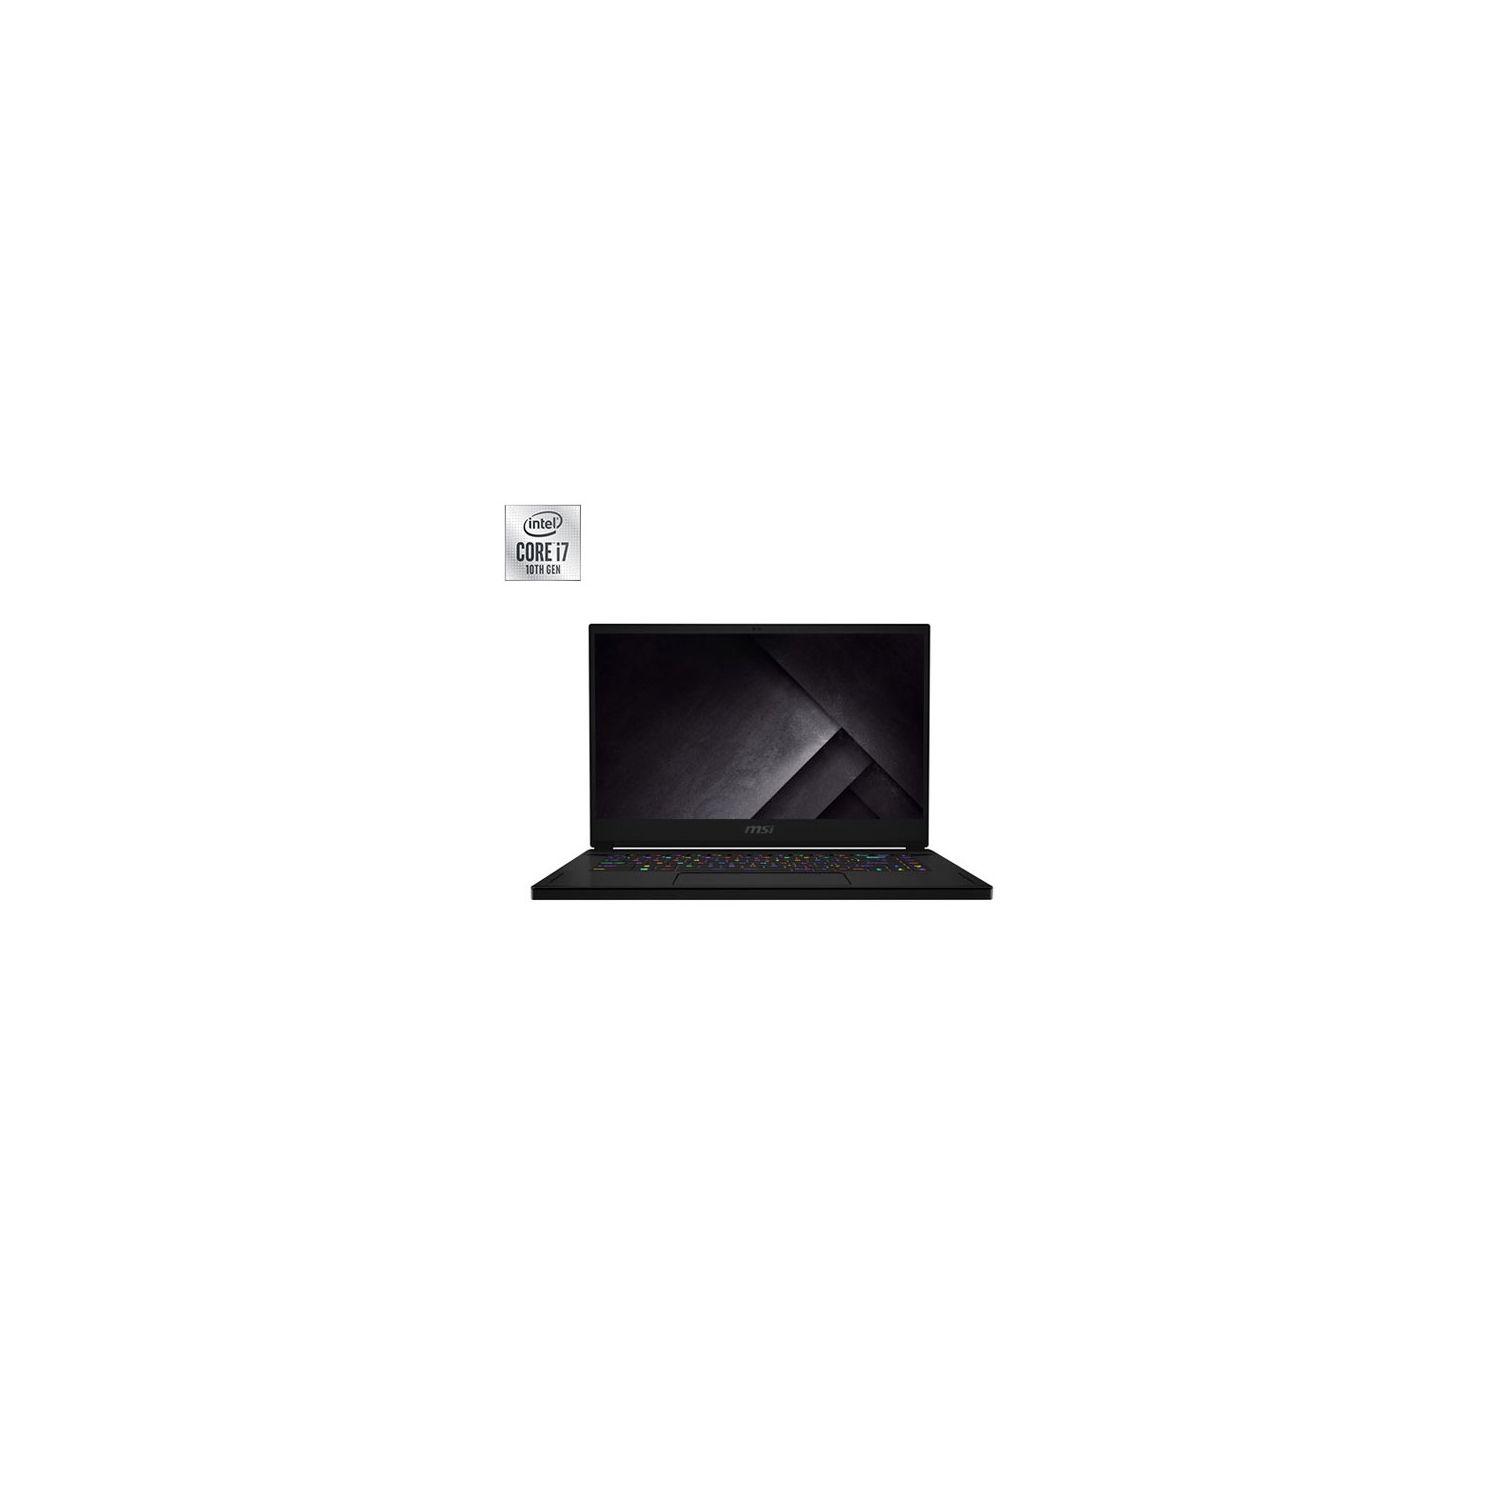 MSI GS66 Stealth 15.6" Gaming Laptop (Intel Core i7-10750H/1TB SSD/GeForce RTX 3060) - Open Box